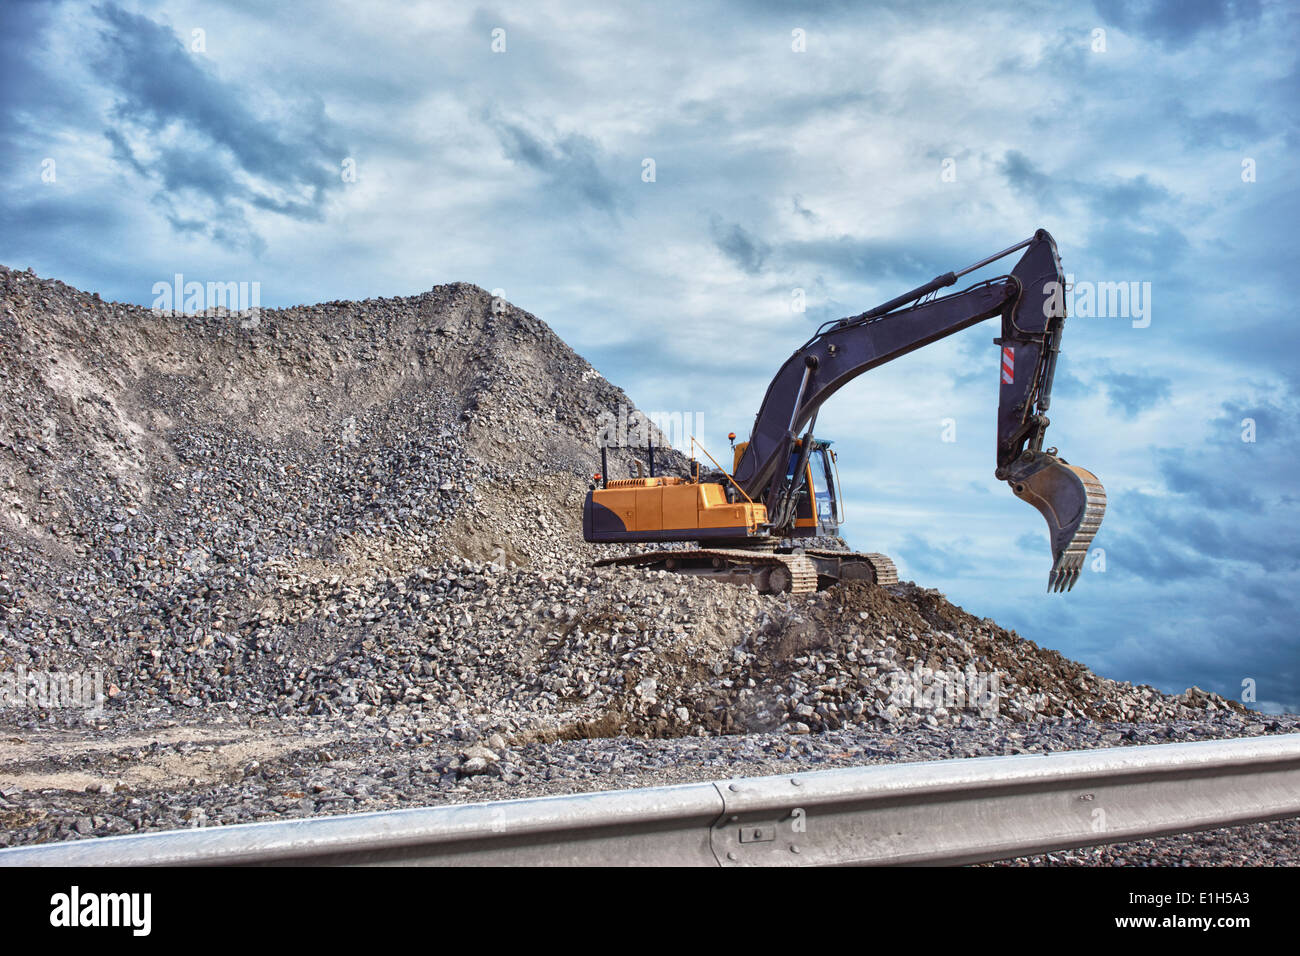 Excavator and mound of construction material Stock Photo